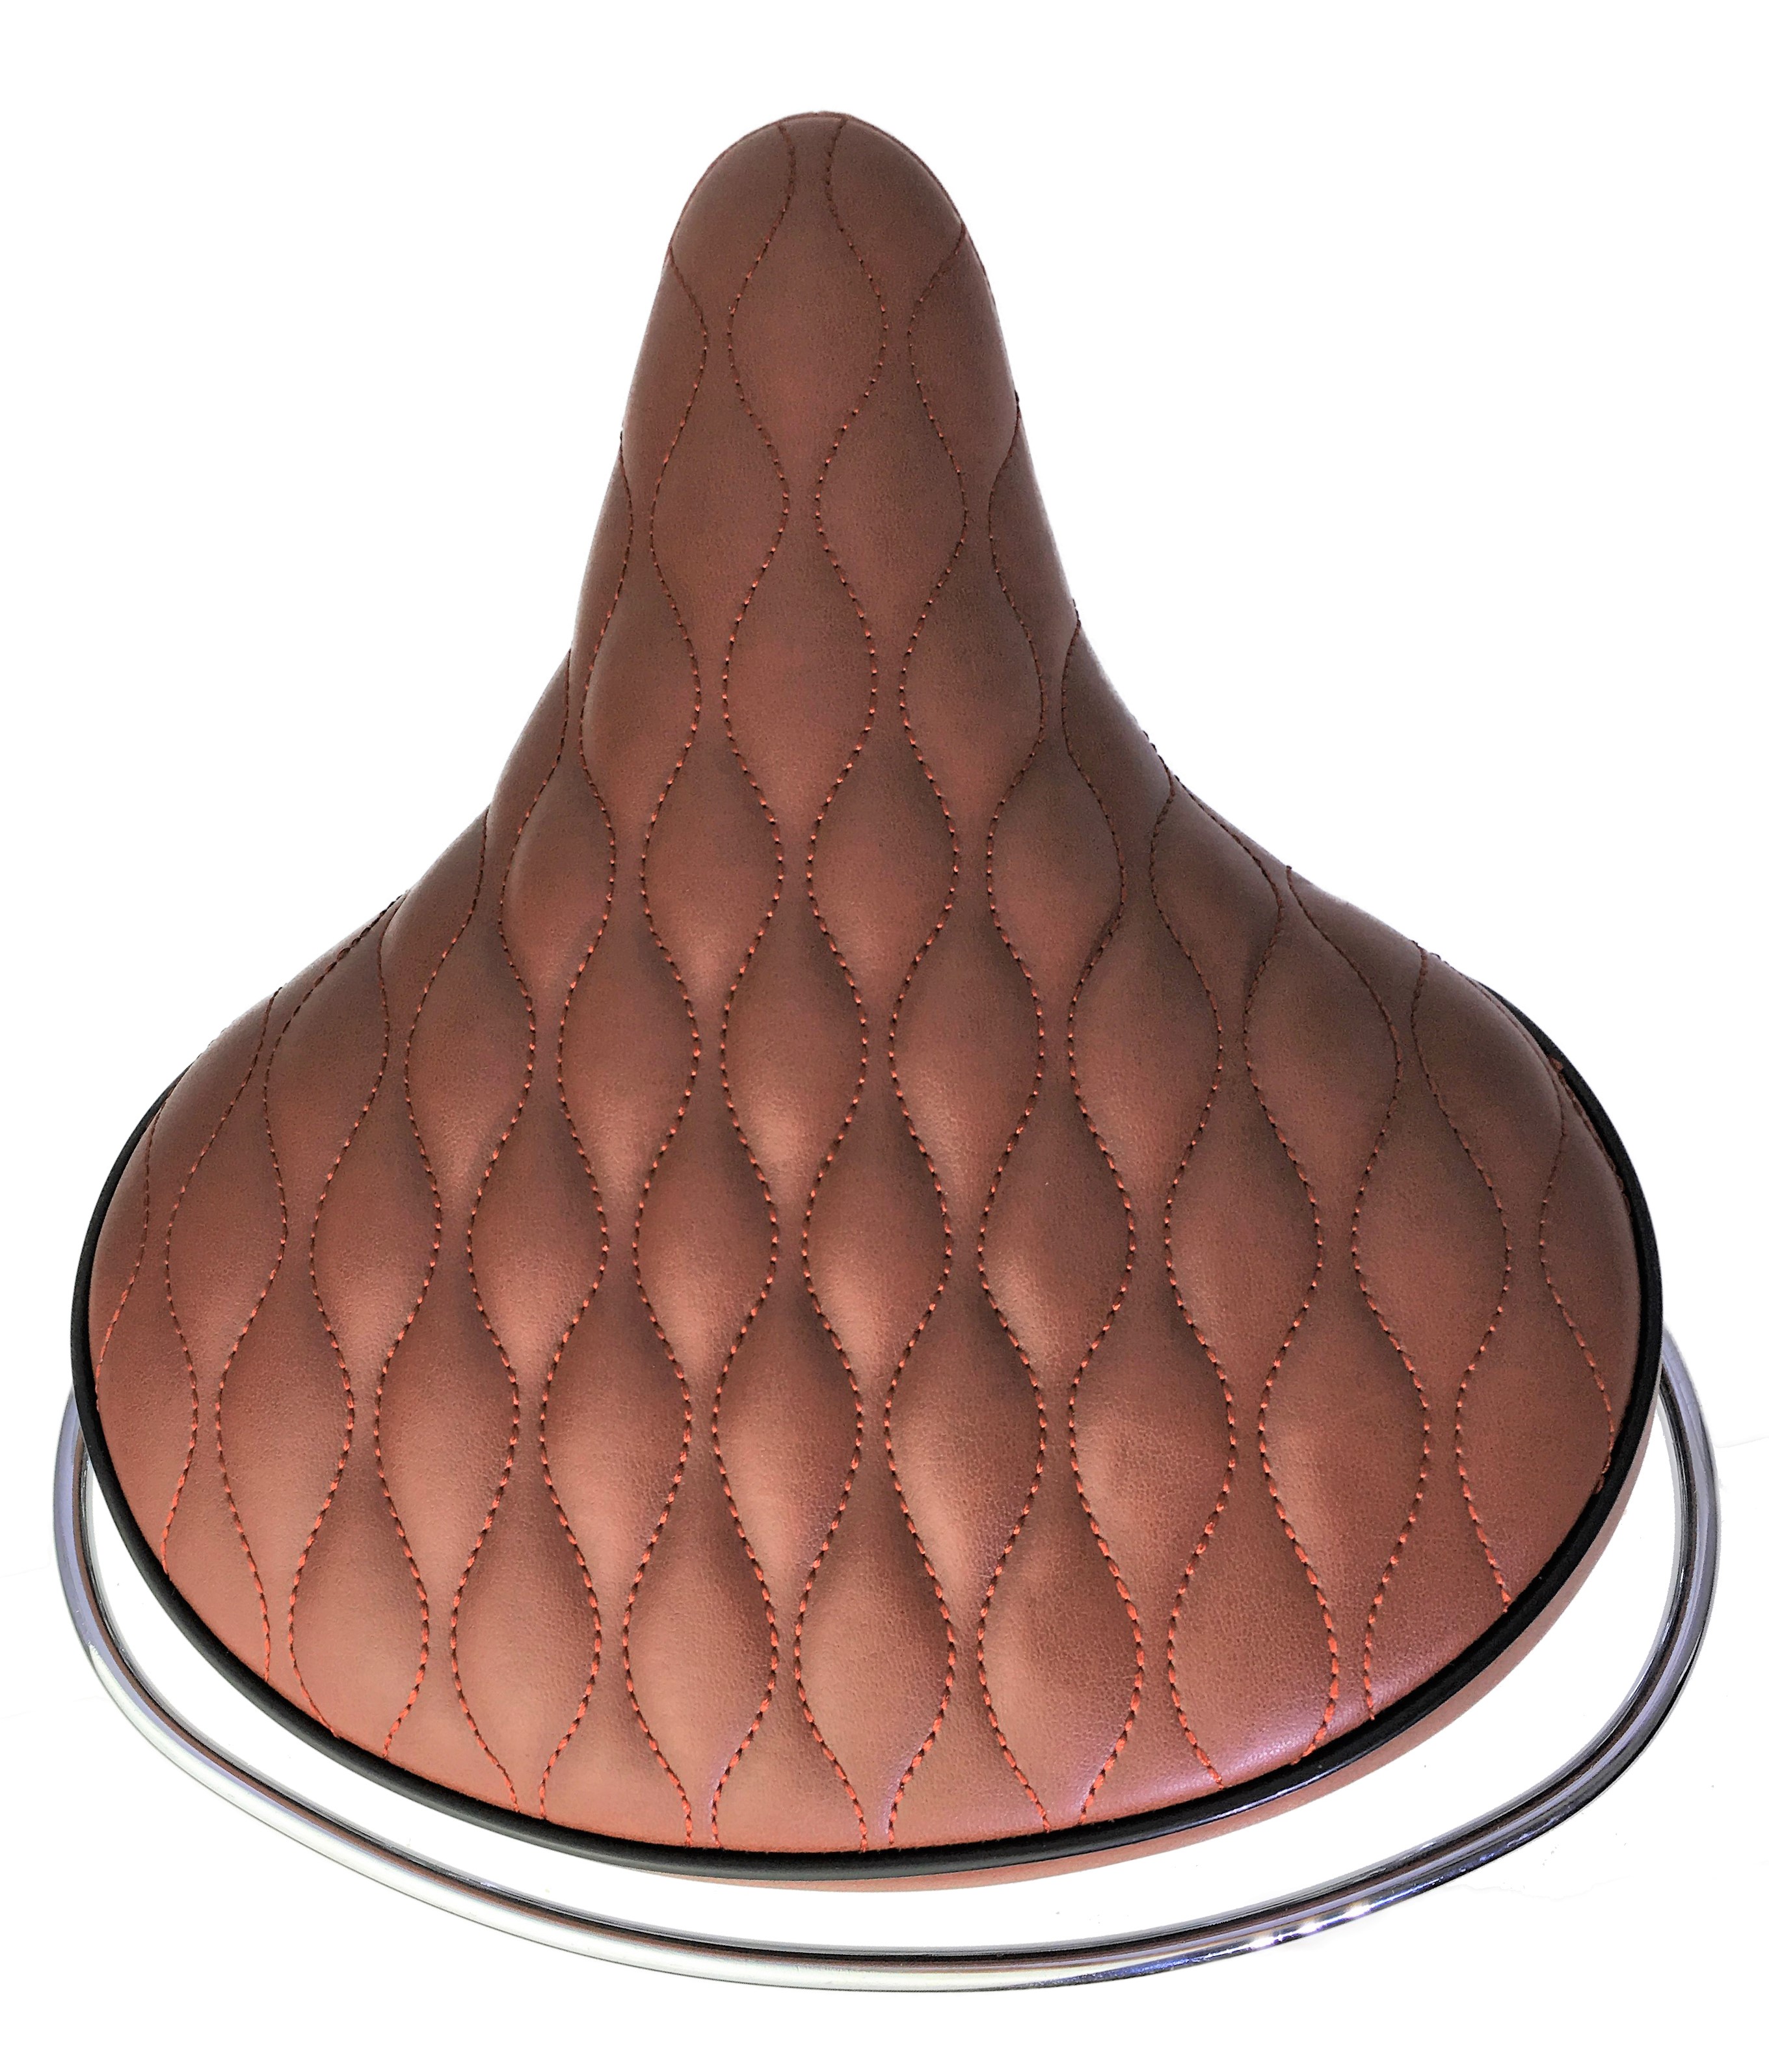 Cruiser Saddle, quilted brown